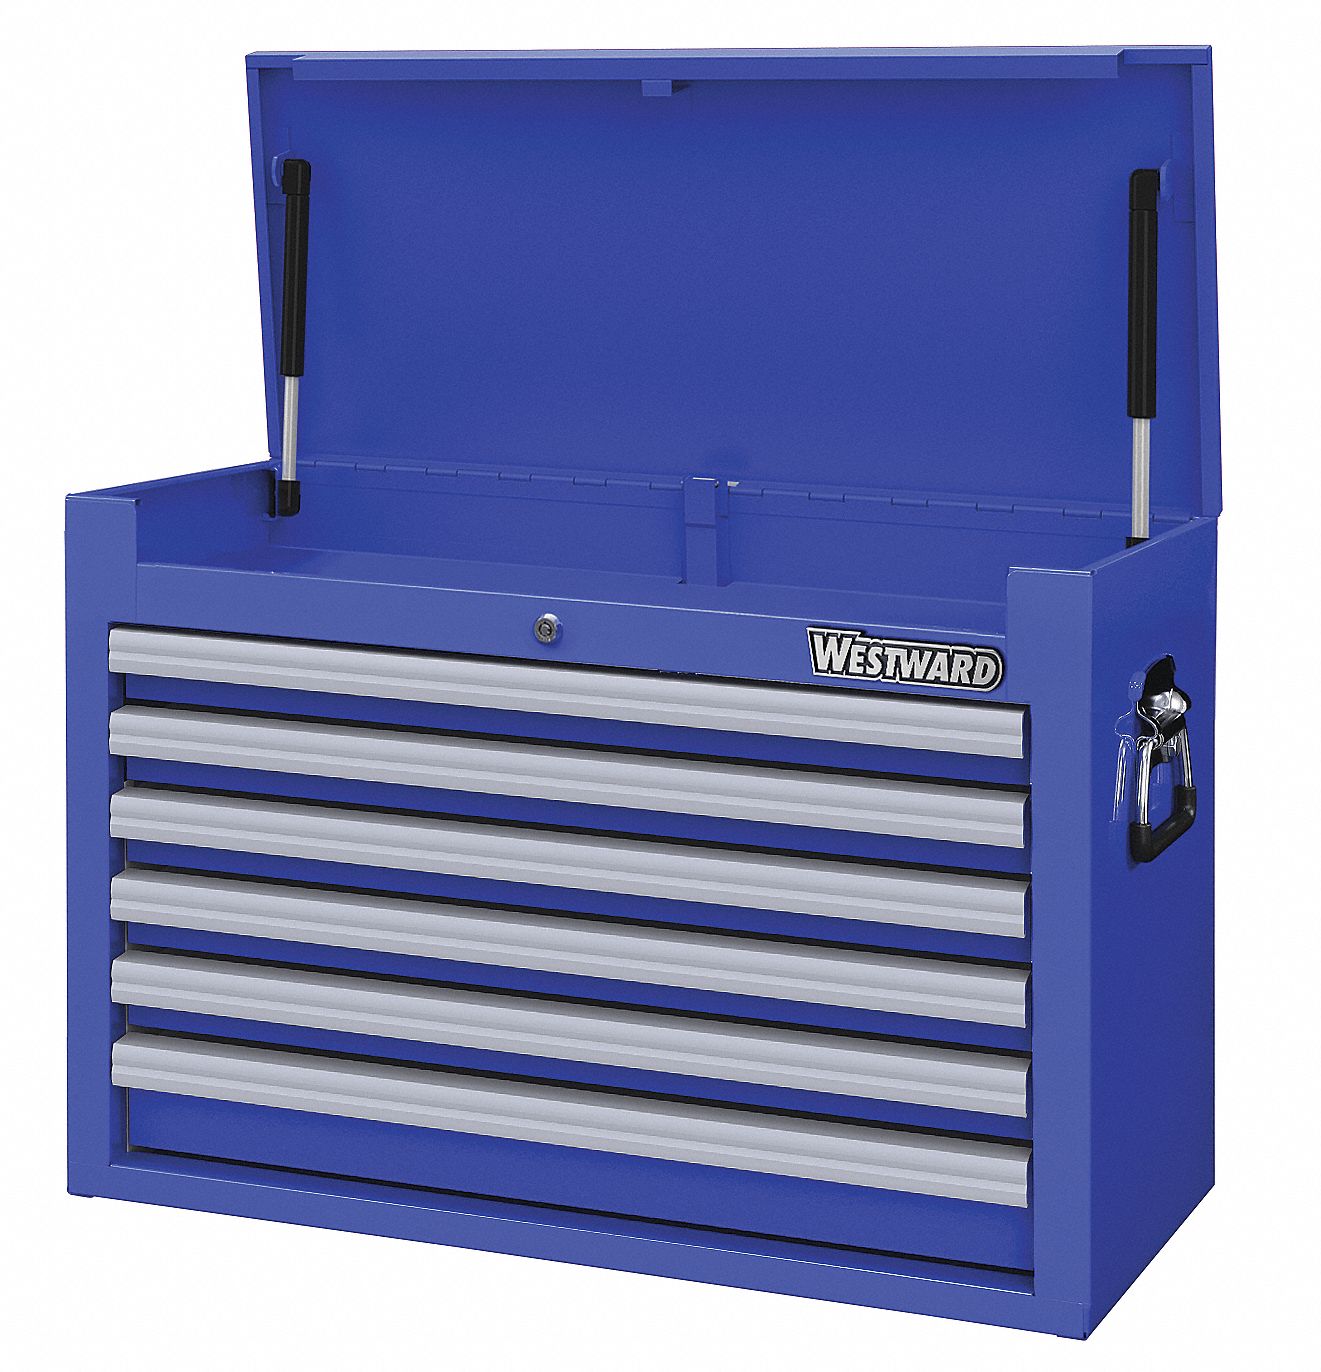 32H835 - G7159 Top Chest 26 x 16-1/2 x 18-1/2 in. Blue